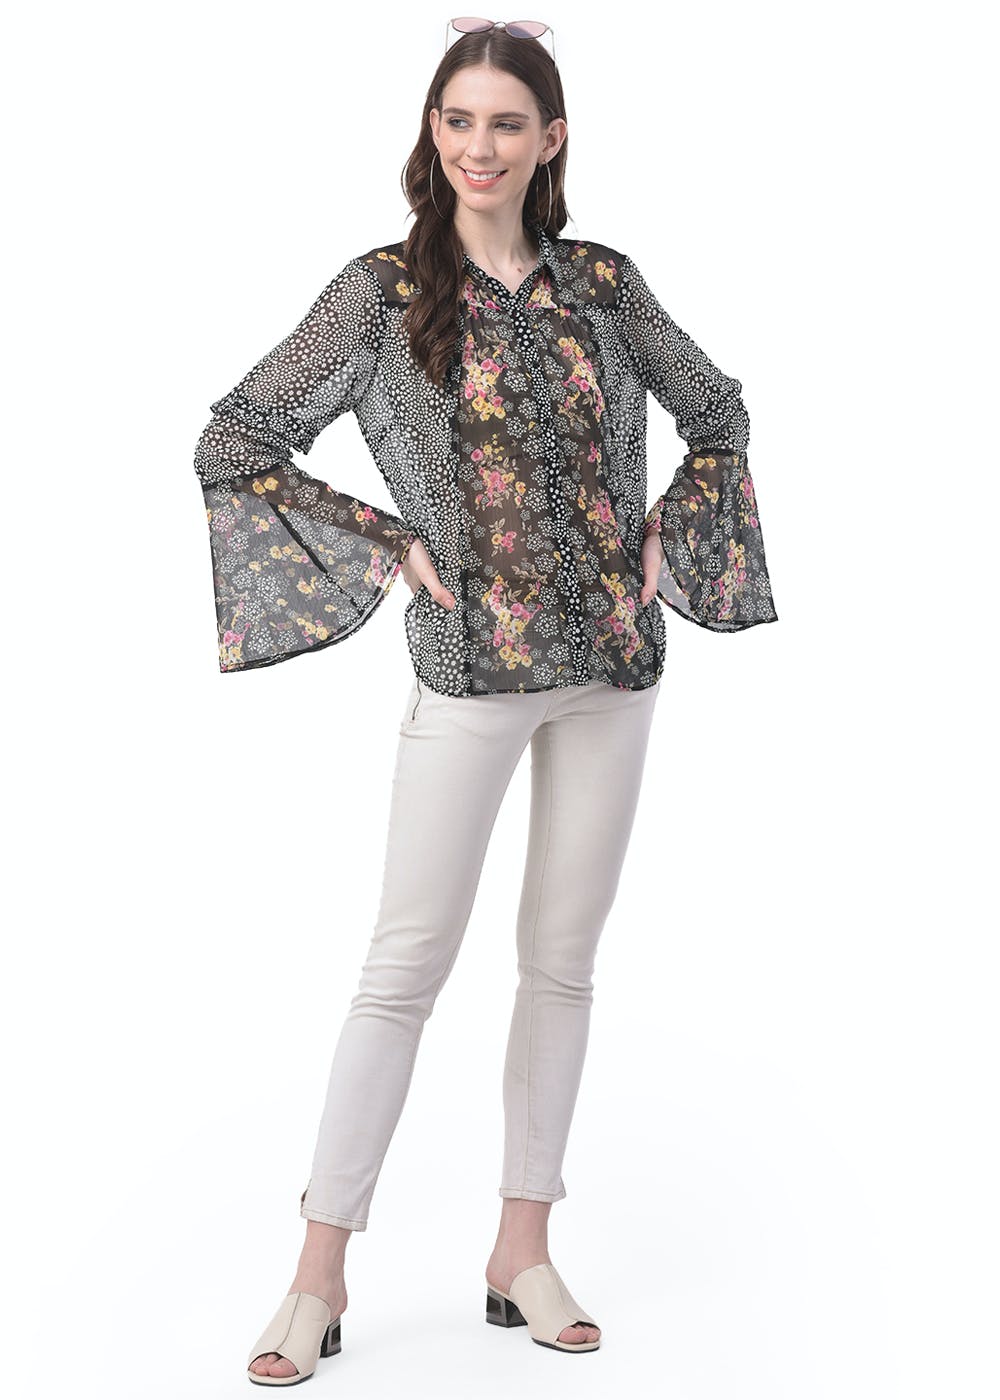 Bell Sleeves Detail Half & Half Printed Button Down Top